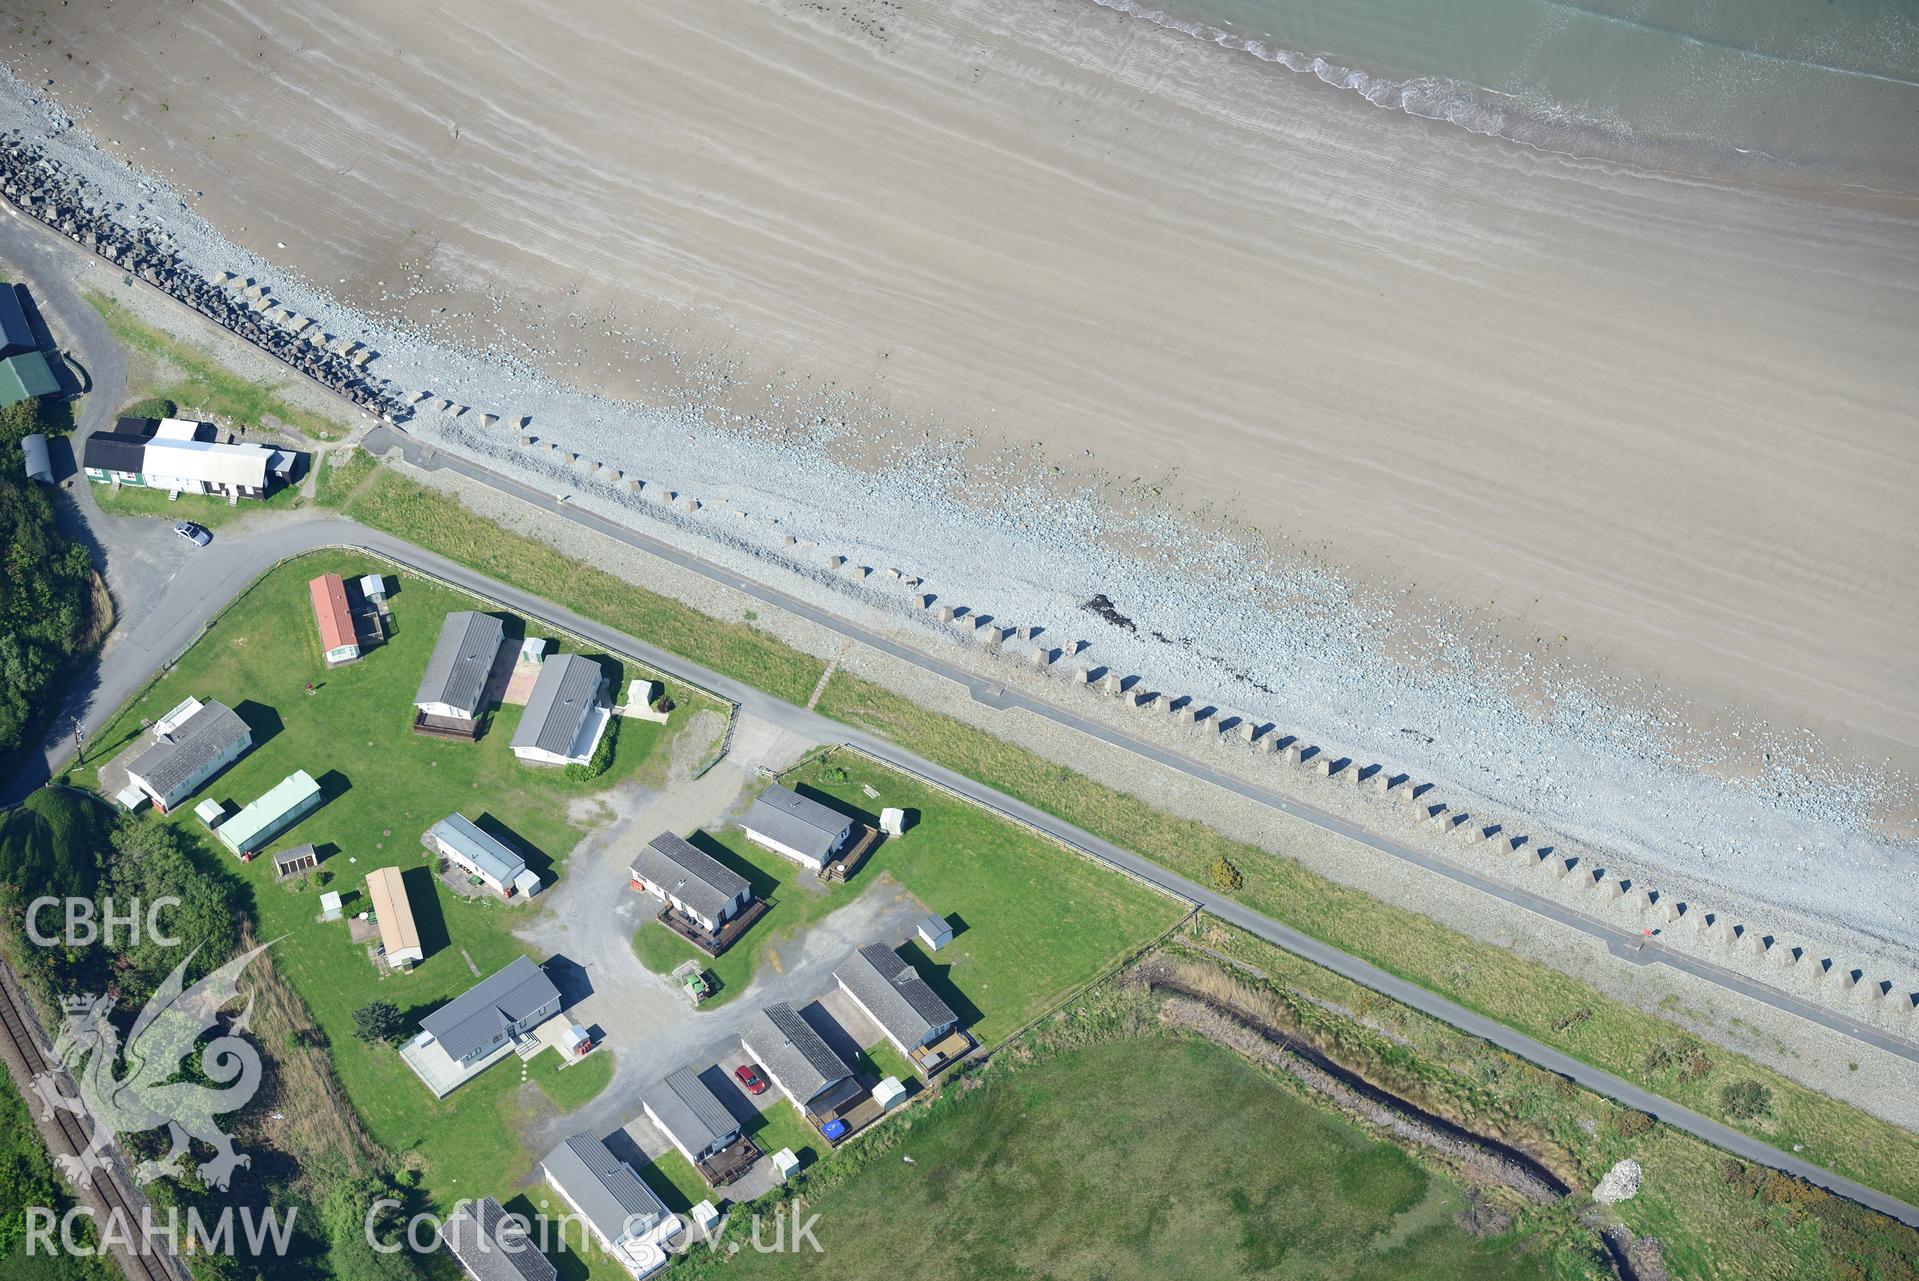 Aerial photography of Fairbourne anti-invasion defences taken on 3rd May 2017.  Baseline aerial reconnaissance survey for the CHERISH Project. ? Crown: CHERISH PROJECT 2017. Produced with EU funds through the Ireland Wales Co-operation Programme 2014-2020. All material made freely available through the Open Government Licence.